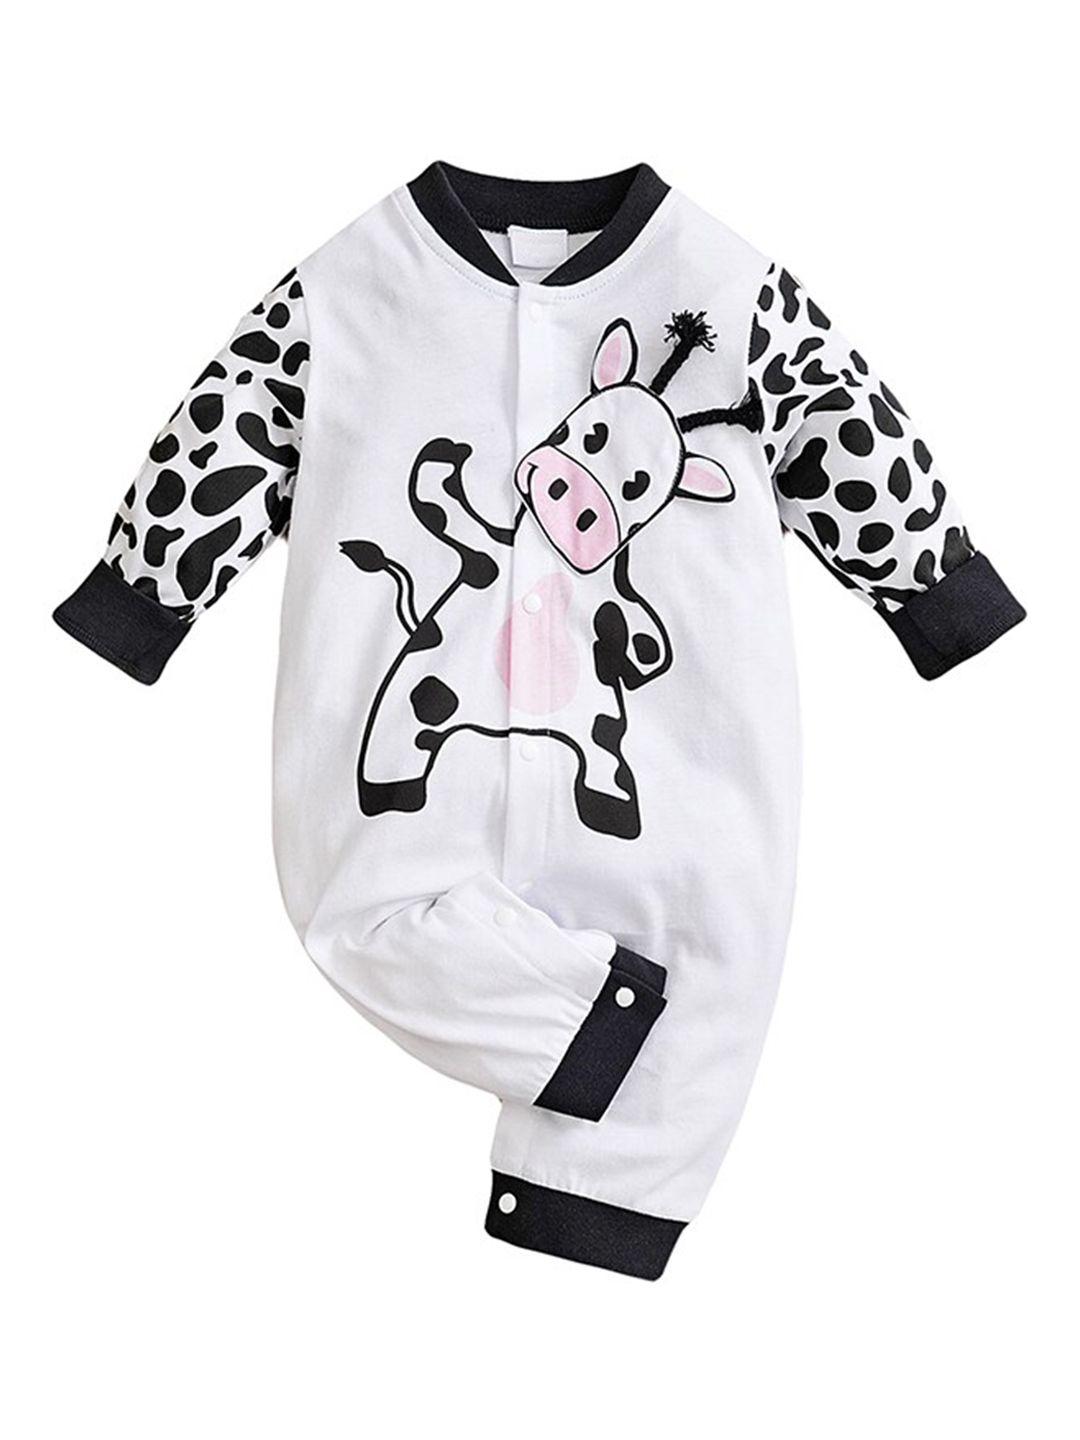 stylecast white & black infants printed cotton rompers